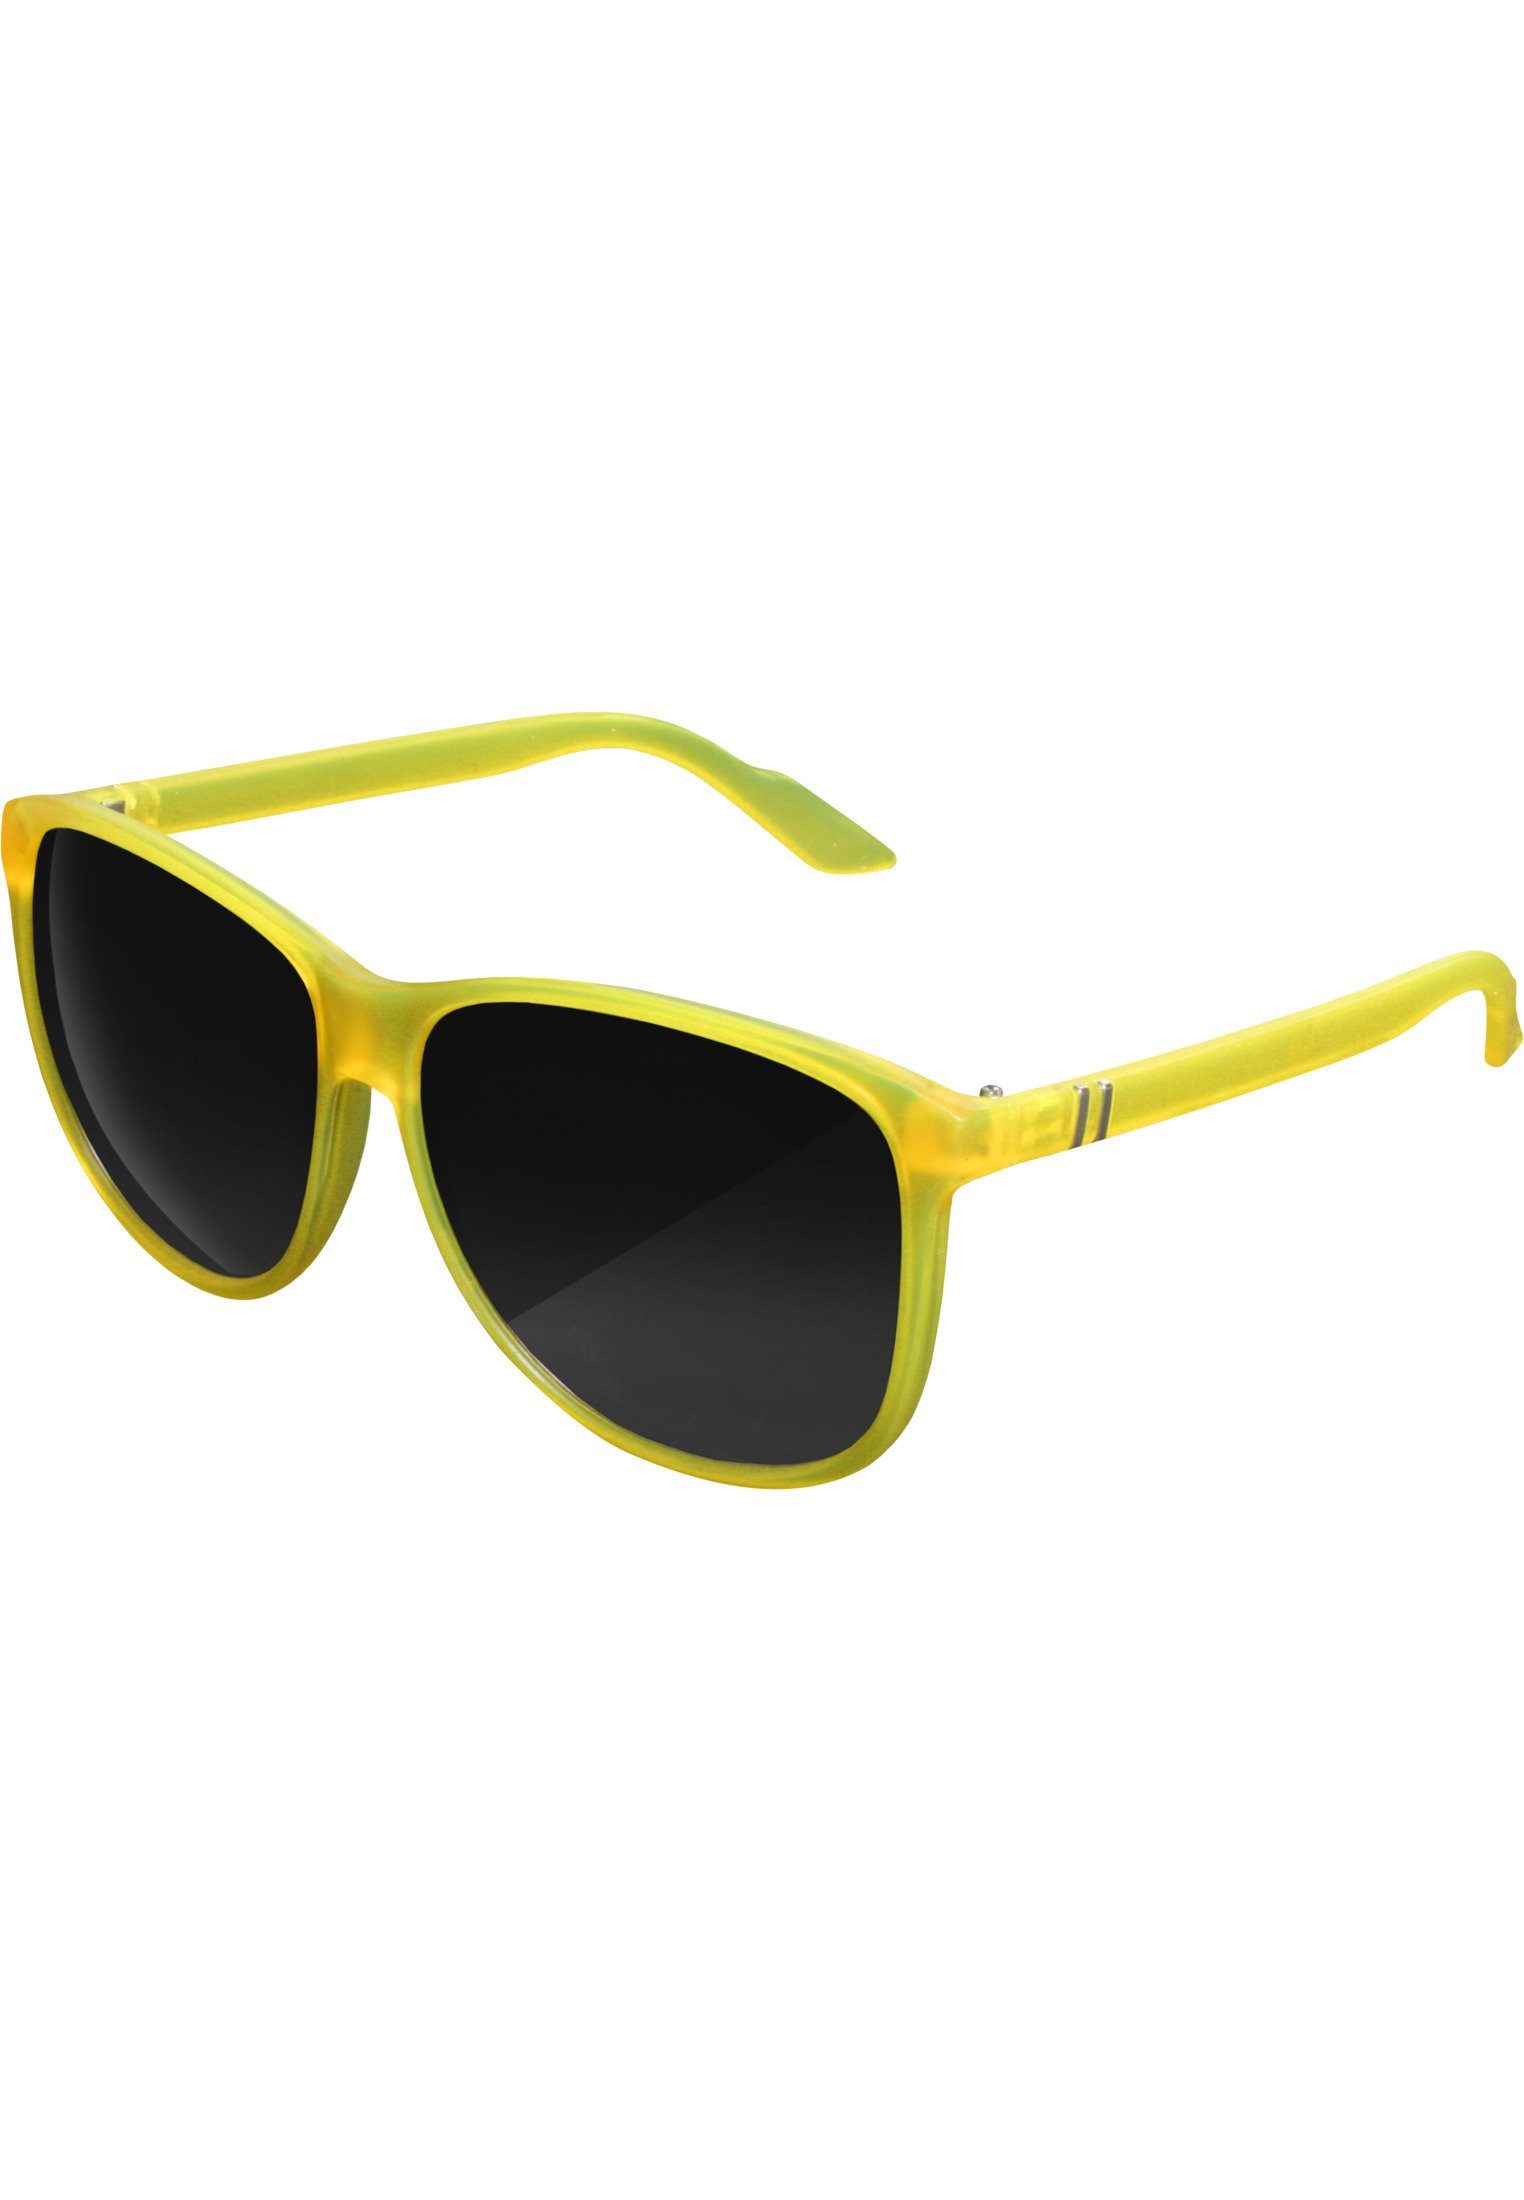 MSTRDS Chirwa neonyellow Sonnenbrille Sunglasses Accessoires